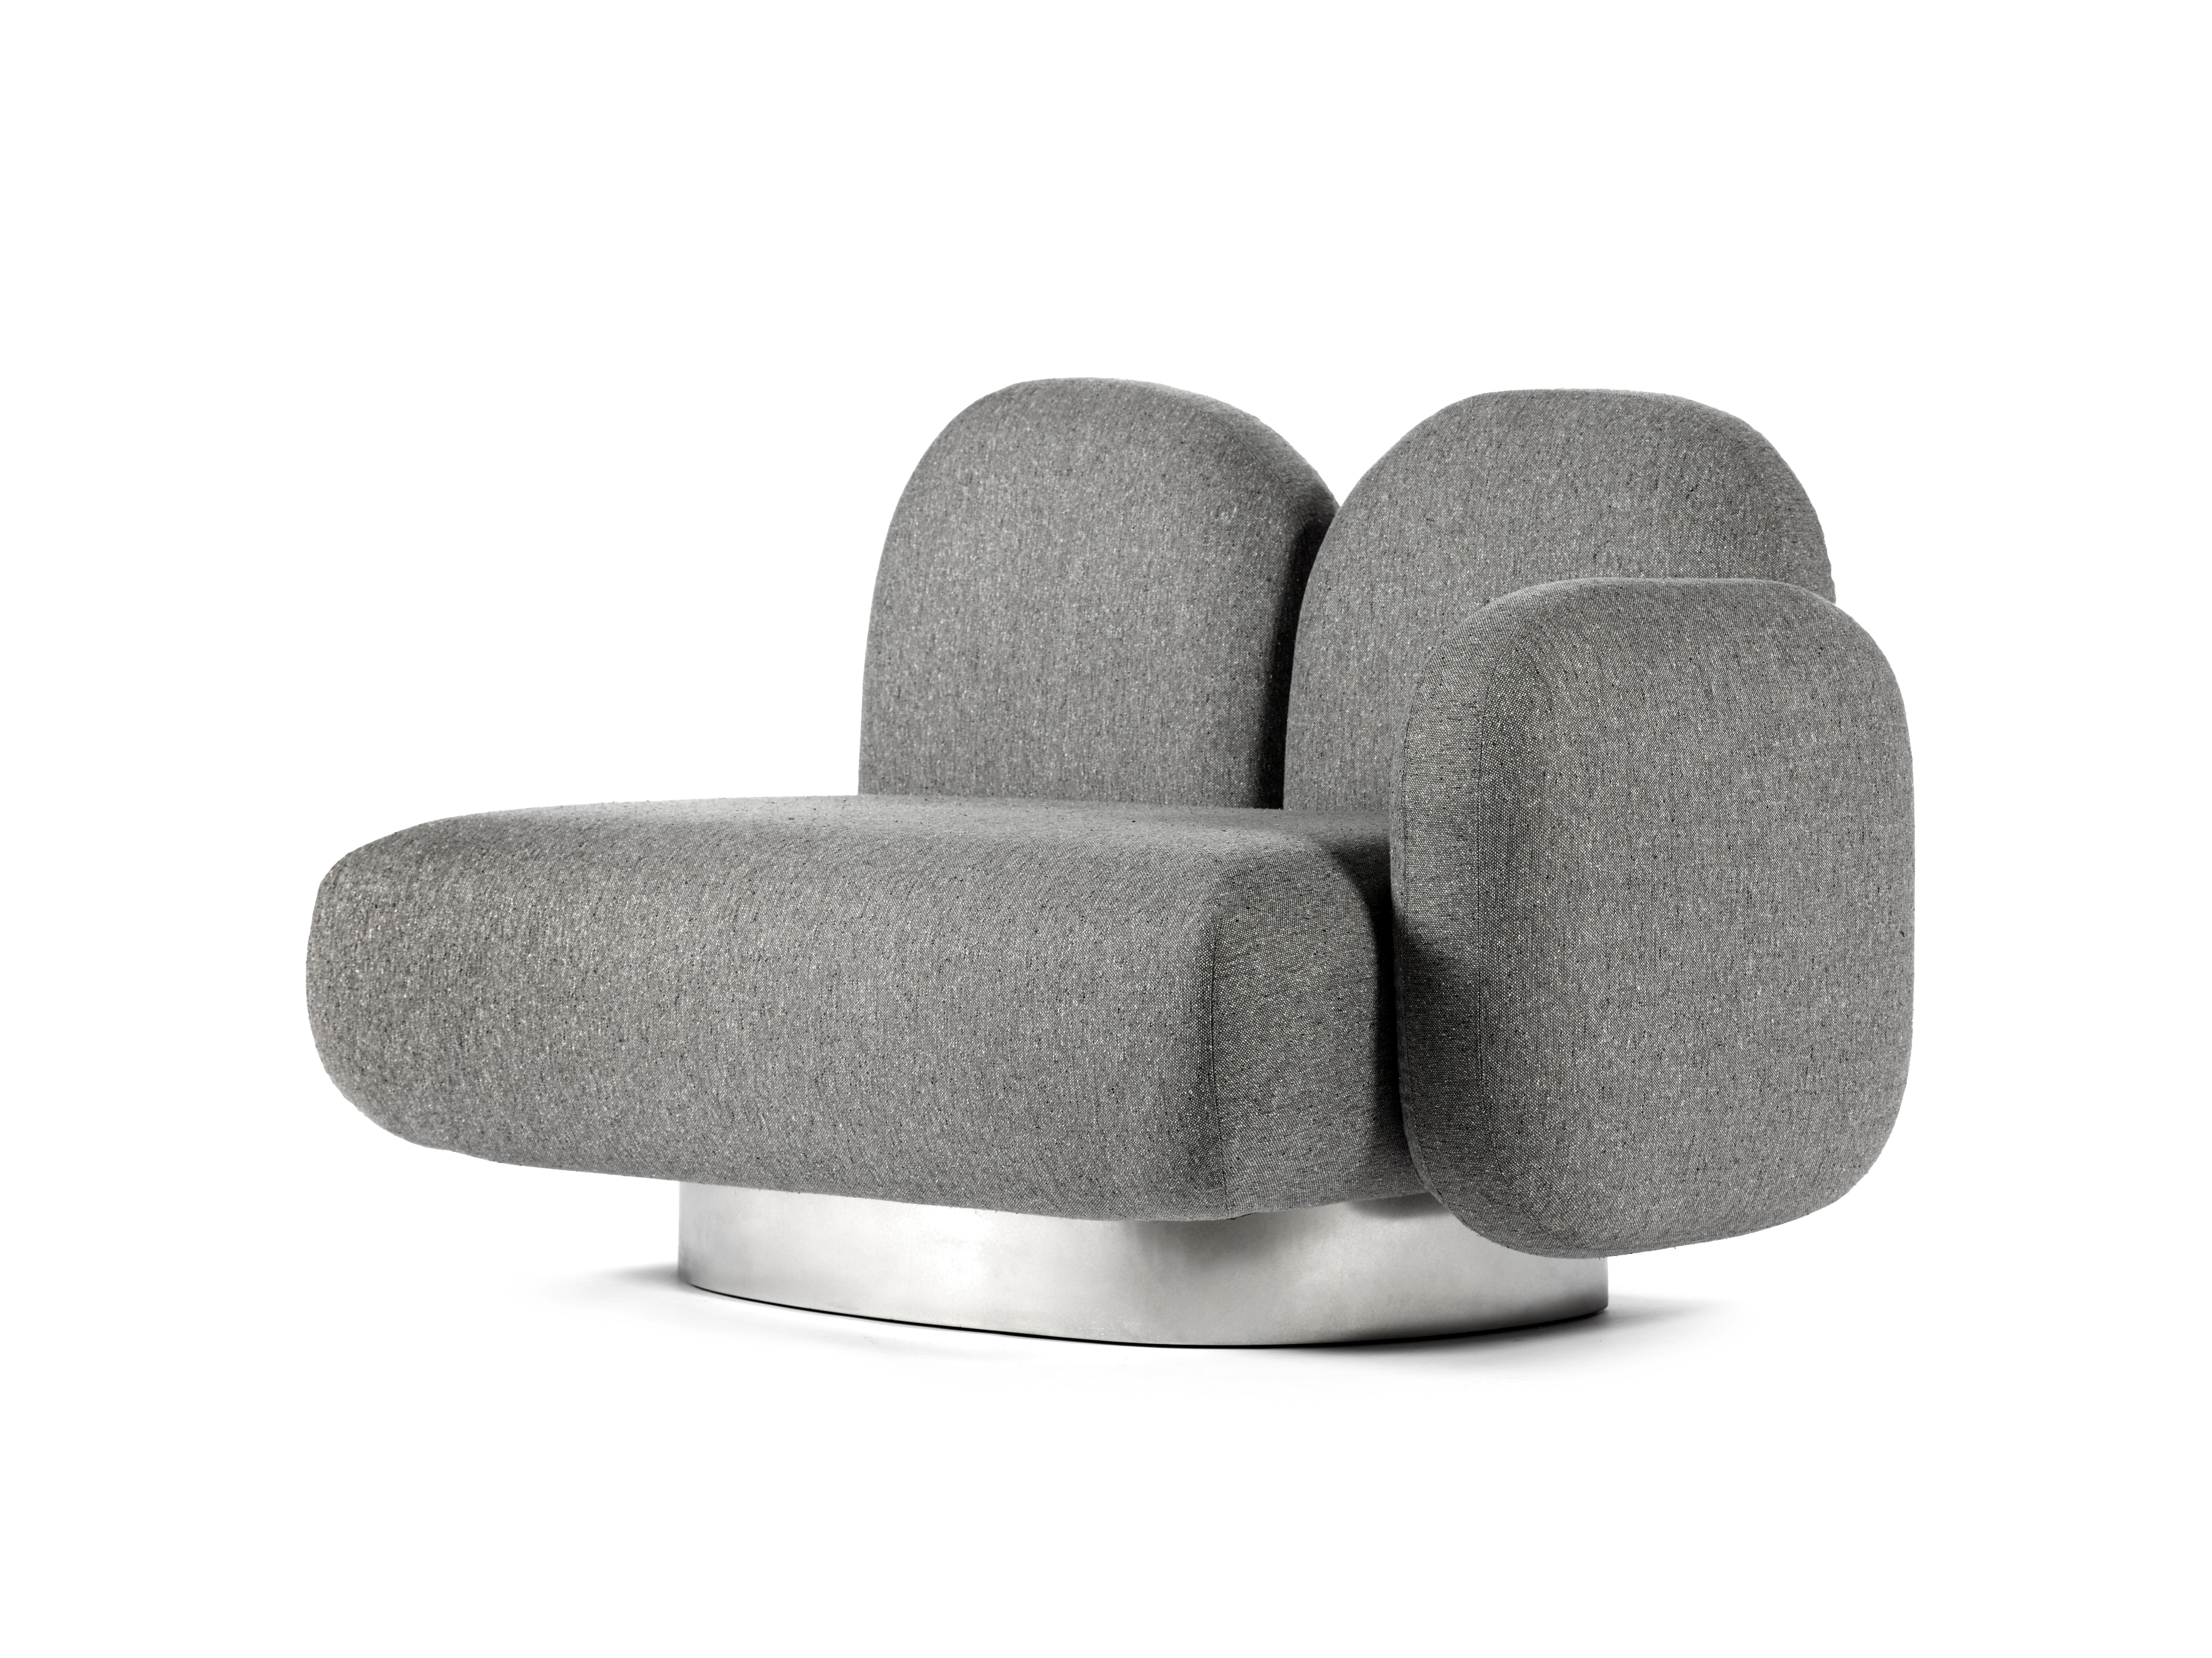 Modular Sofa Assemble 1-seat-sofa with 1 armrest right
Designed by Destroyers/Builders x Valerie Objects
Upholstery: gijon sand

Code: V9020323

Dimensions: L 87 W 123 H 85CM (SH 40 cm)
Materials: Wood, aluminium and upholstery

The ASSEMBLE sofa